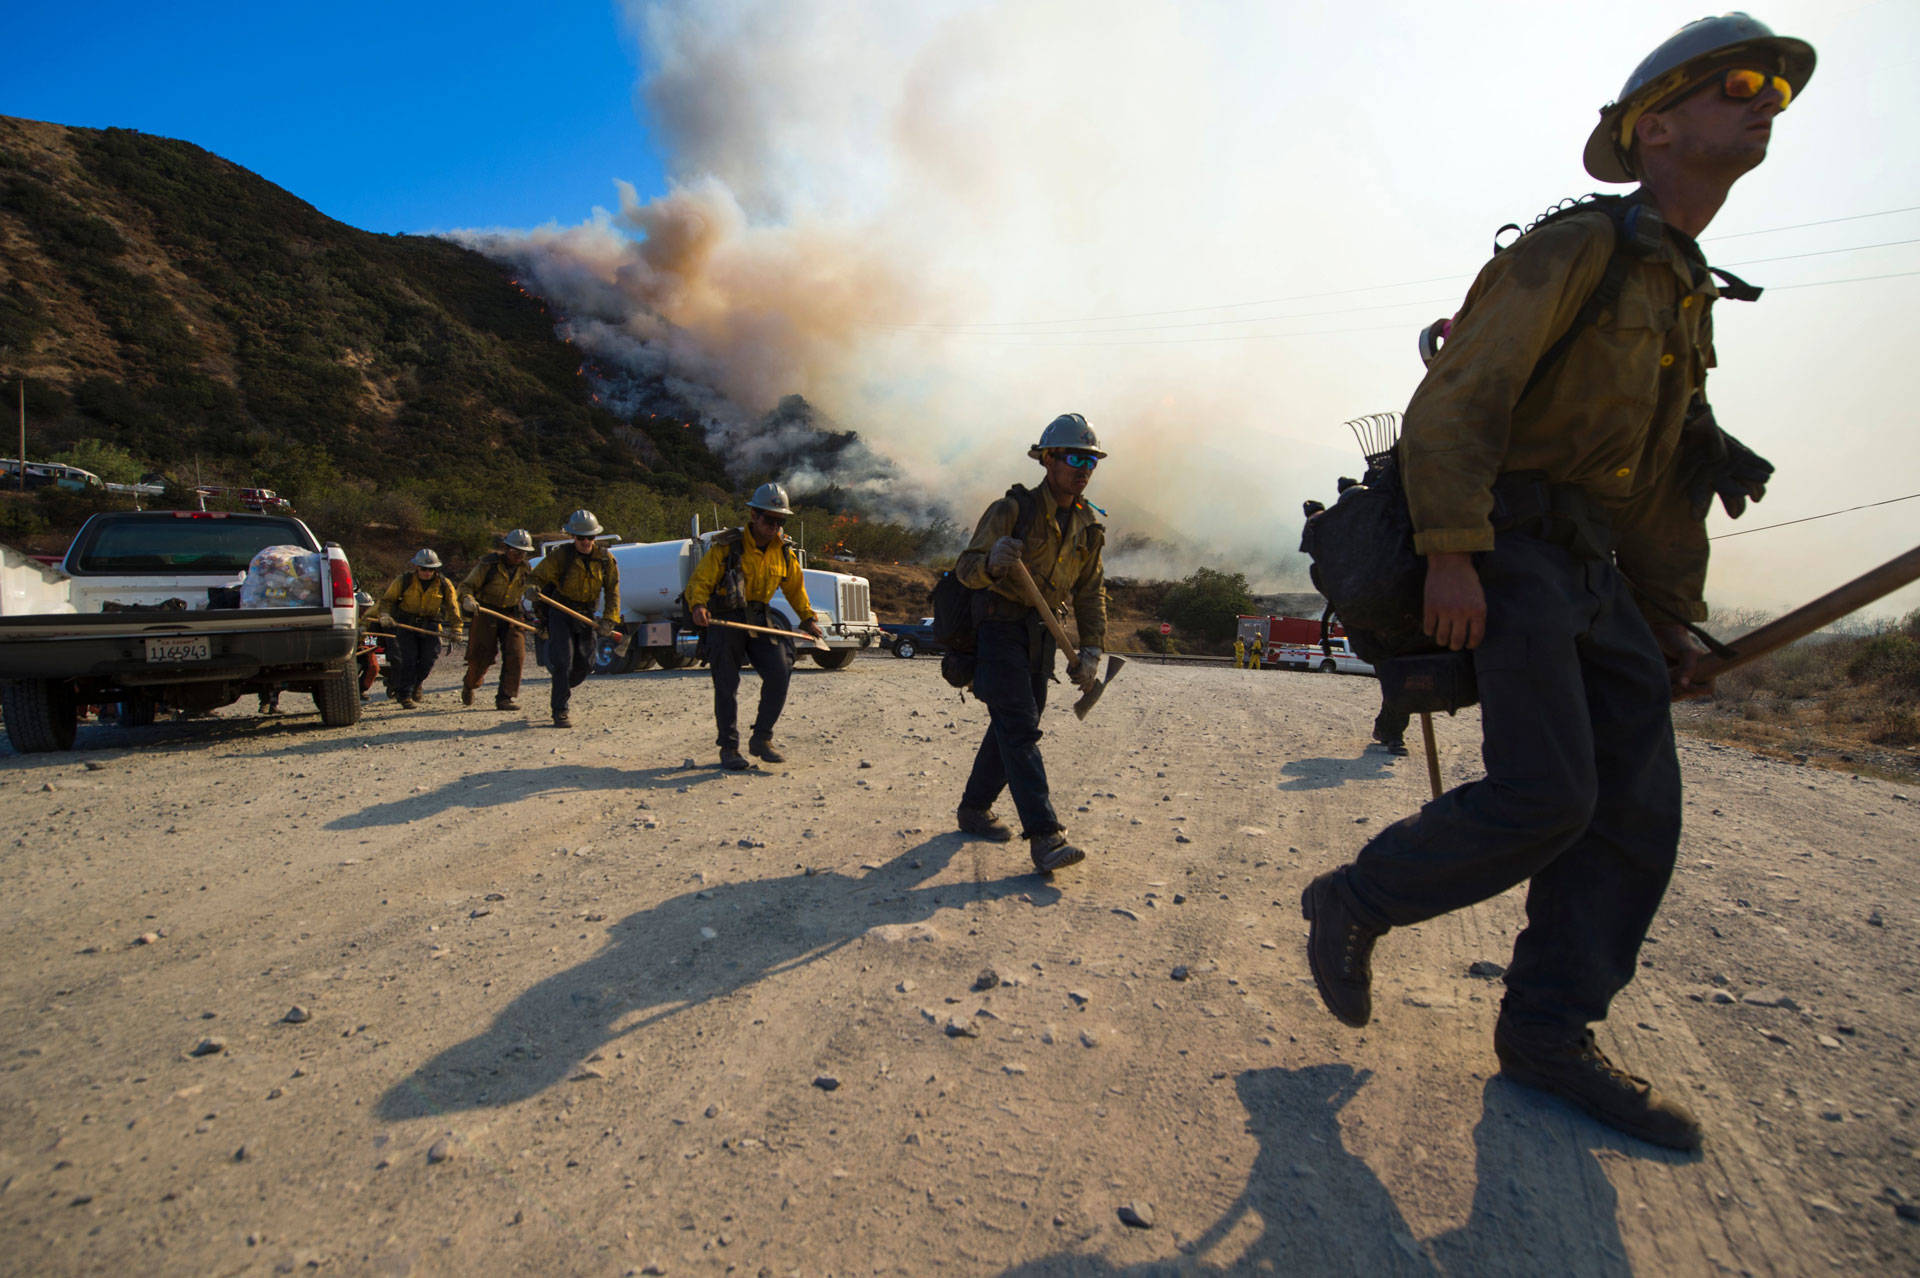 Firefighters prepare to clear a hot spot at the Blue Cut Fire near Wrightwood on Aug. 17, 2016. The blaze destroyed nearly 100 homes and forced the evacuation of 80,000 people in San Bernardino County. Robyn Beck/AFP/Getty Images